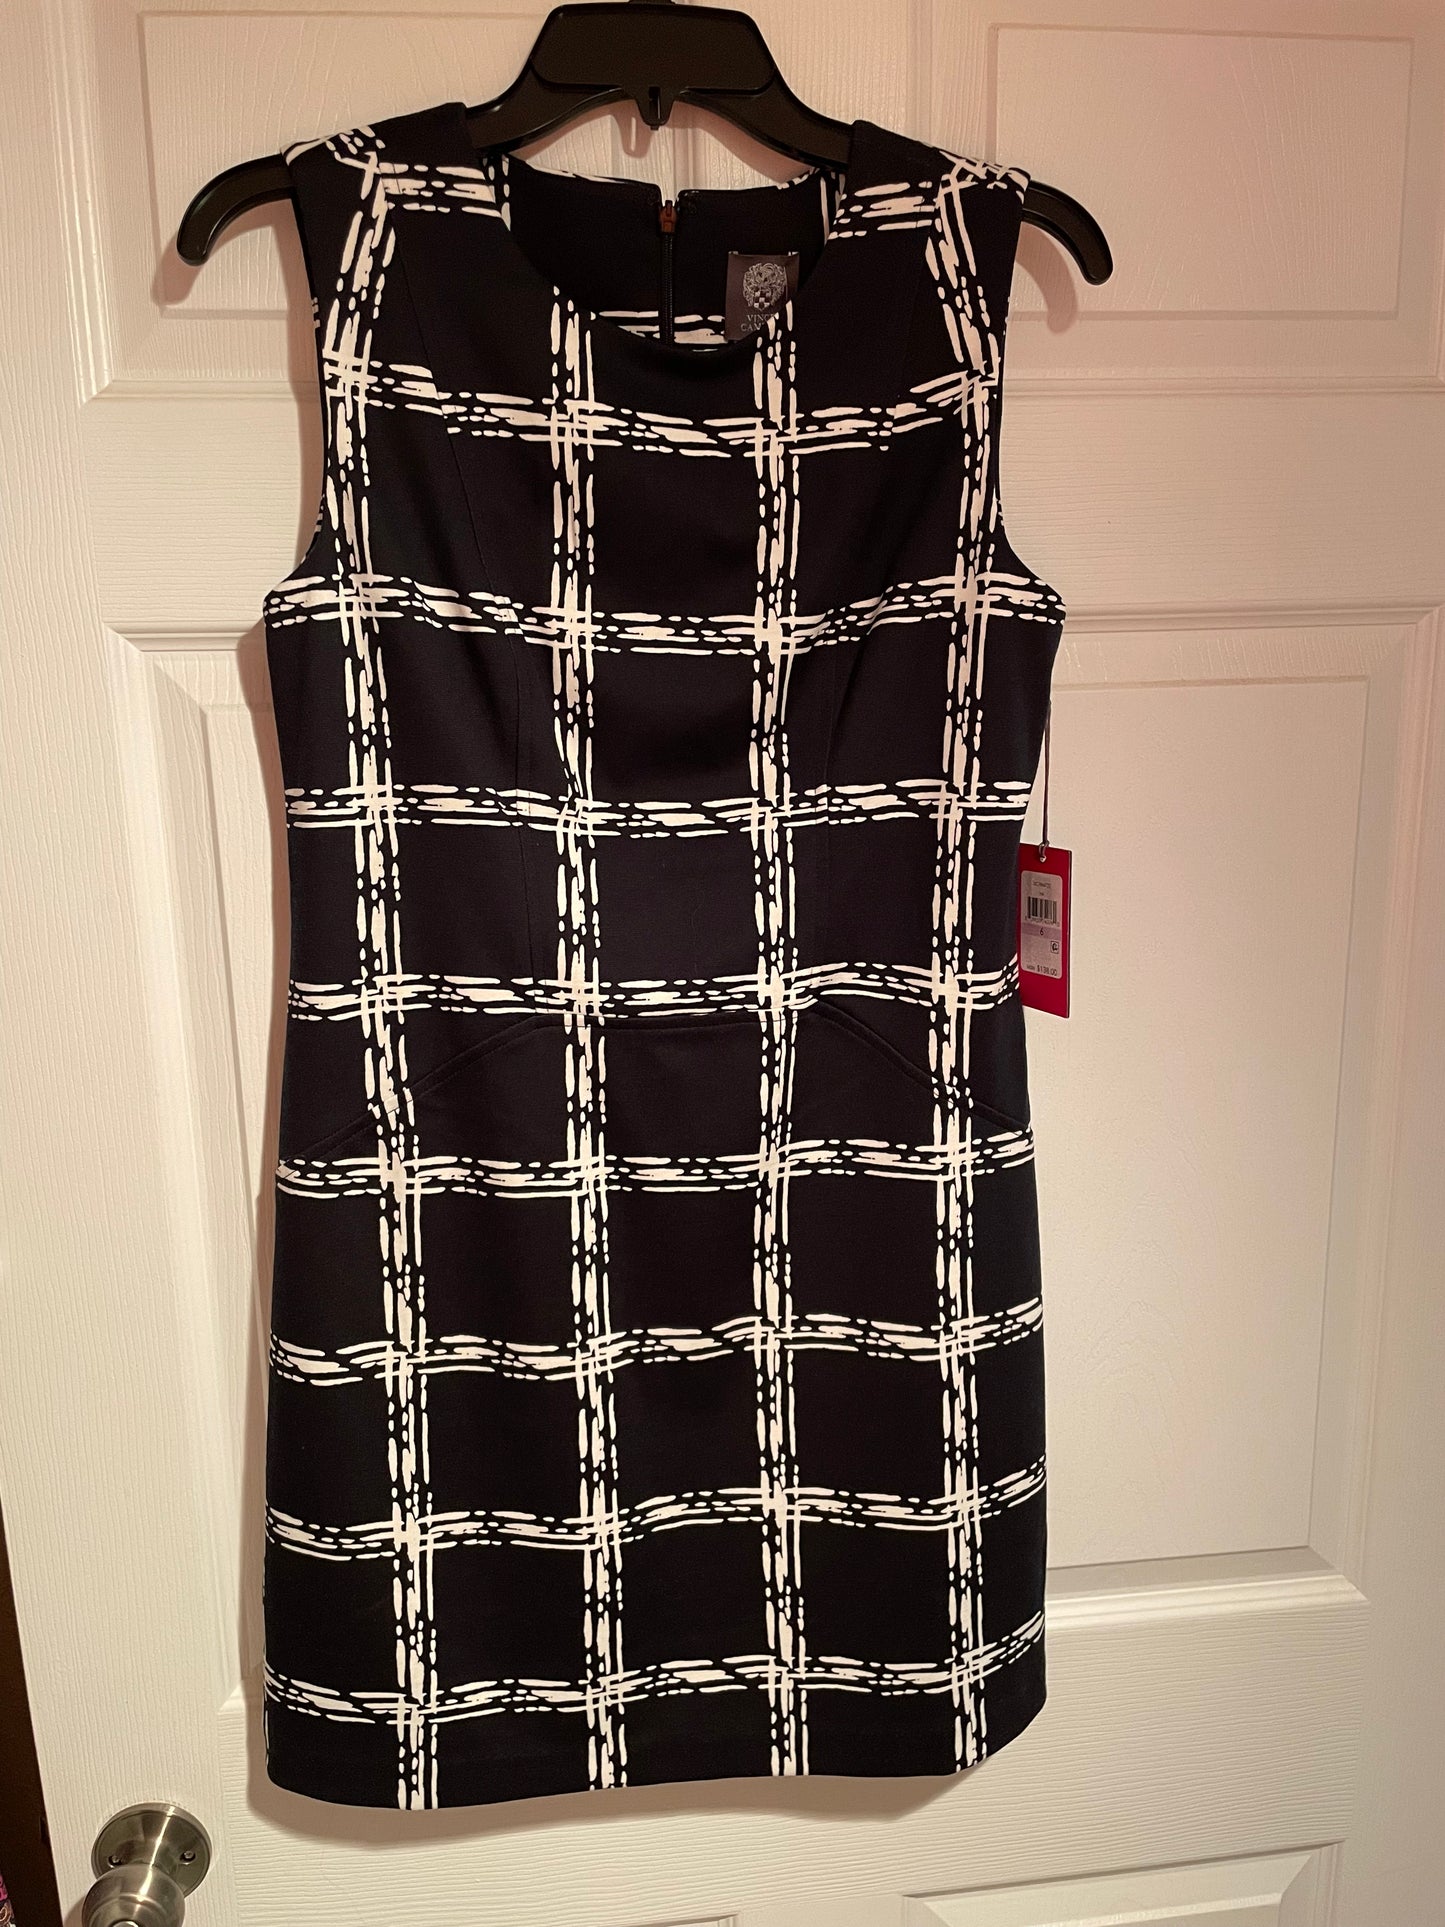 Vince Camuto Size 6 Black & White Dress NEW with Tags